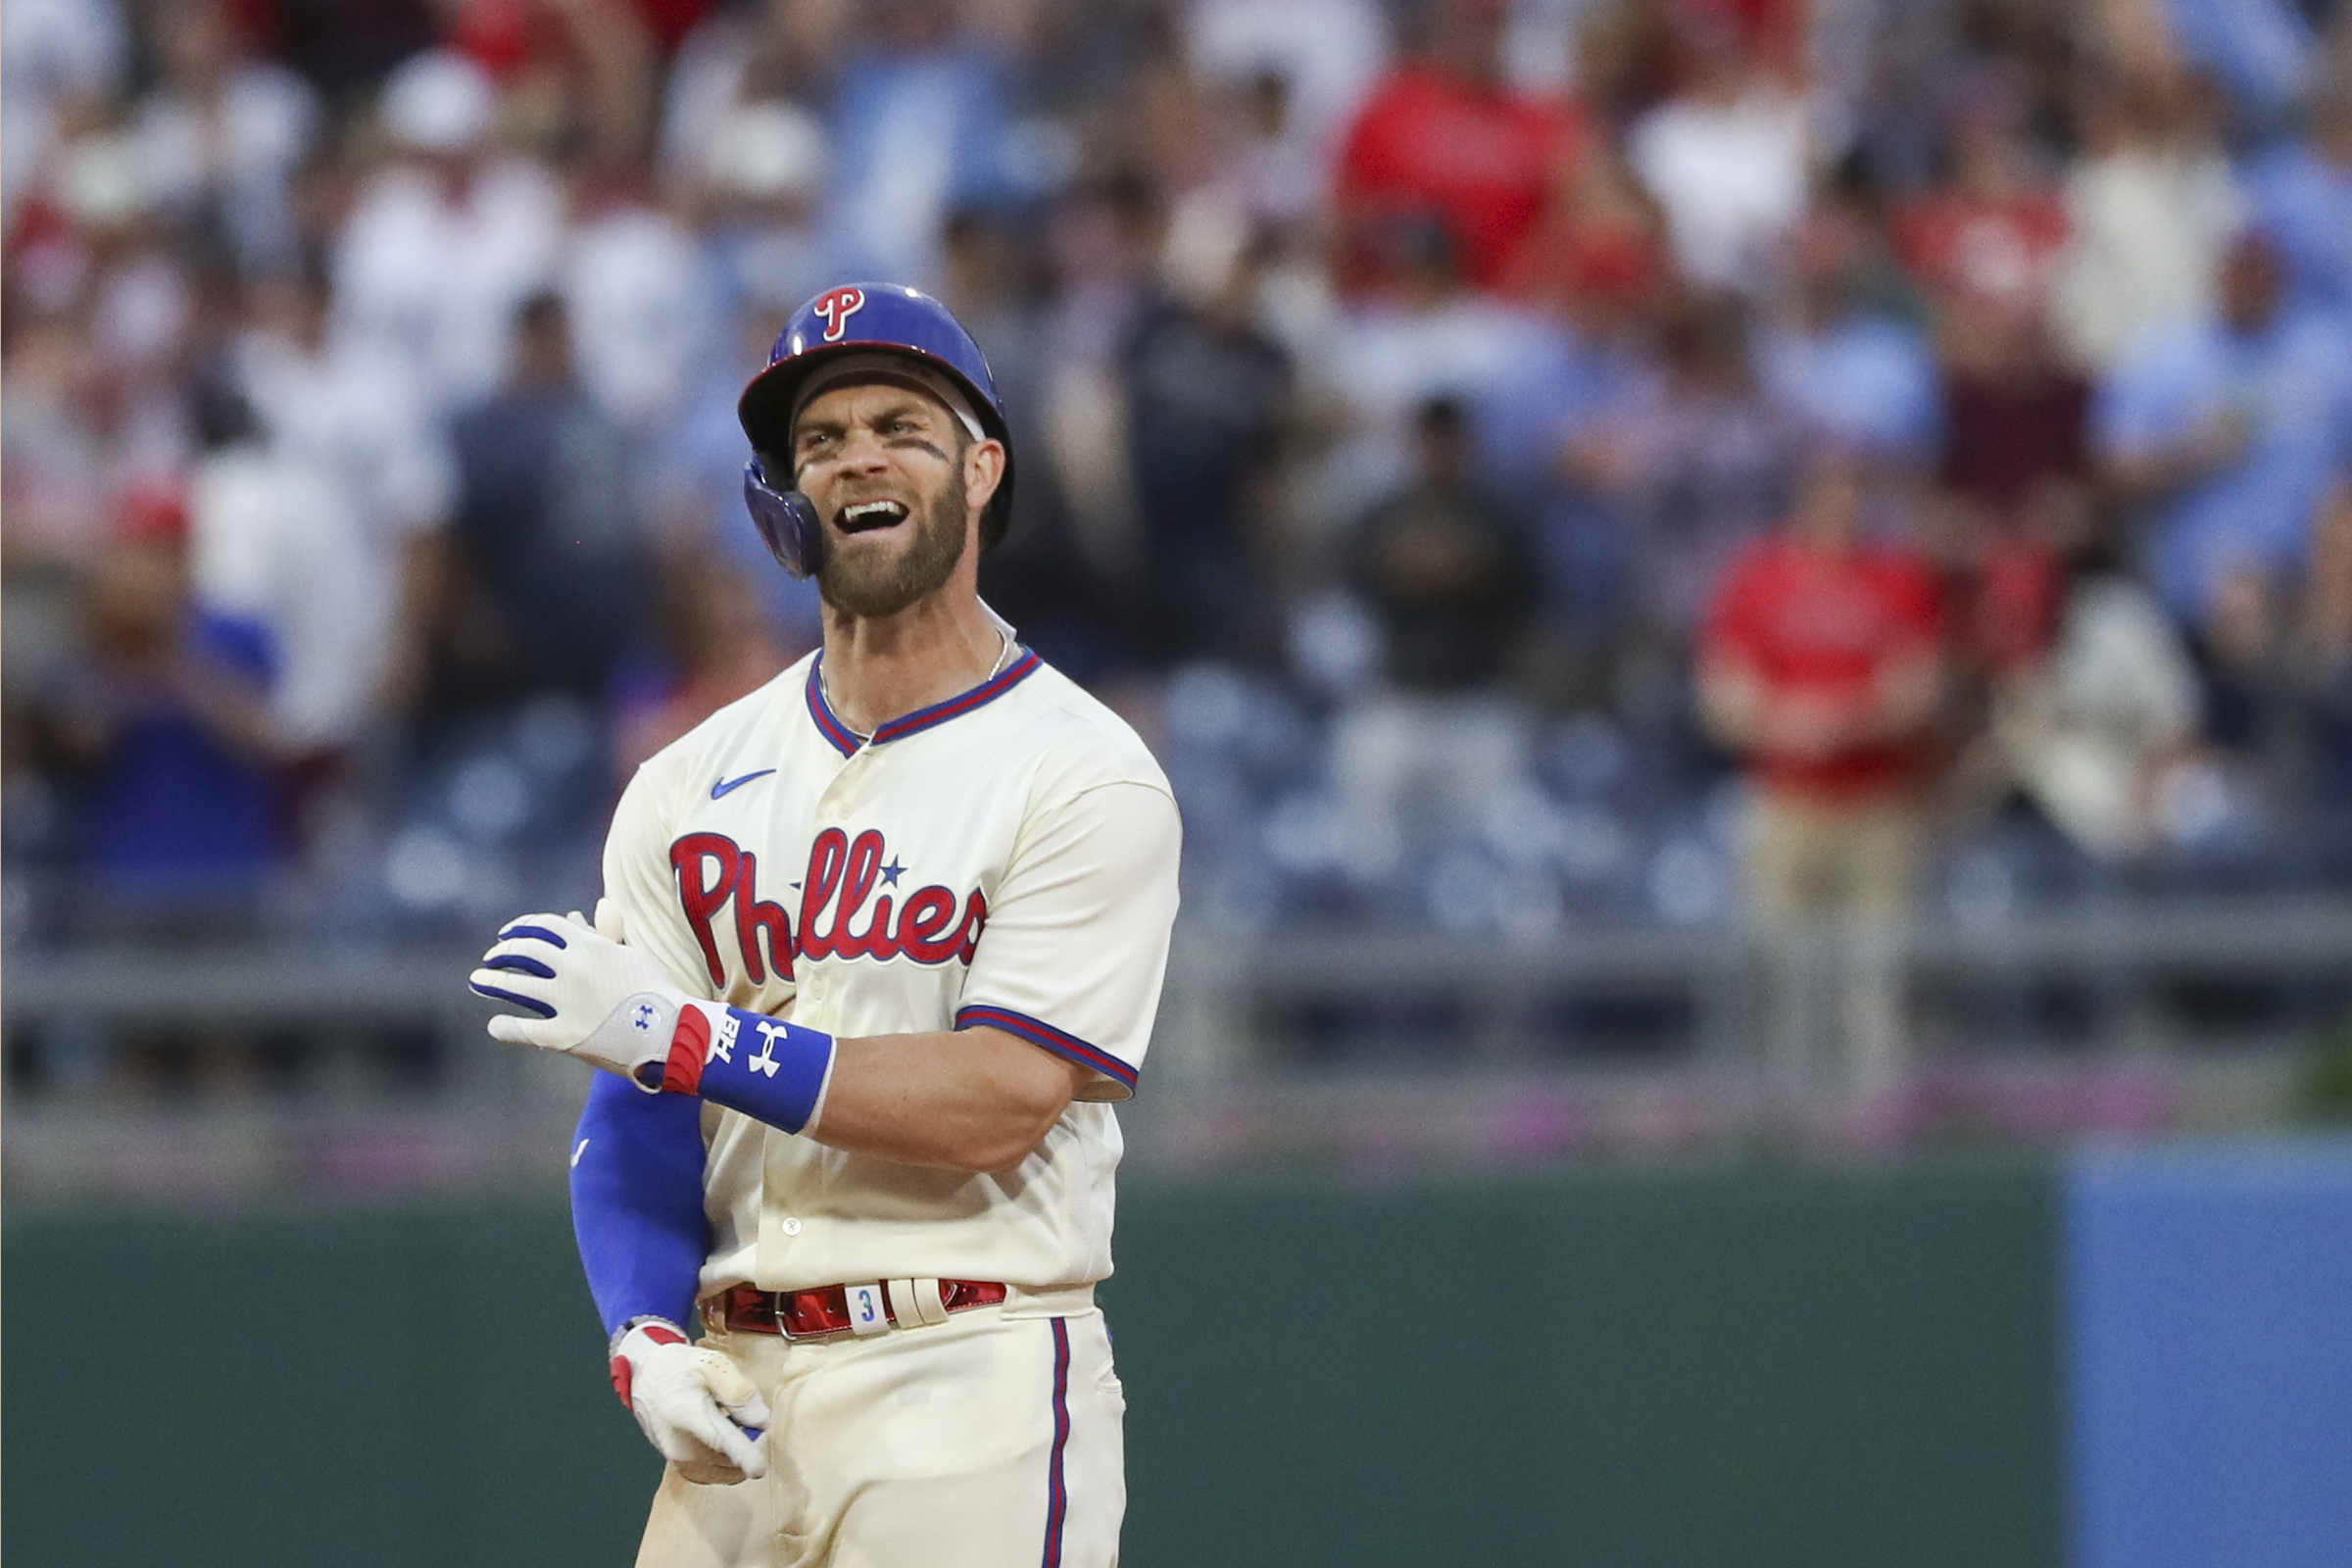 Bryce Harper returns to the Phillies' lineup after missing 1 game with back  spasms